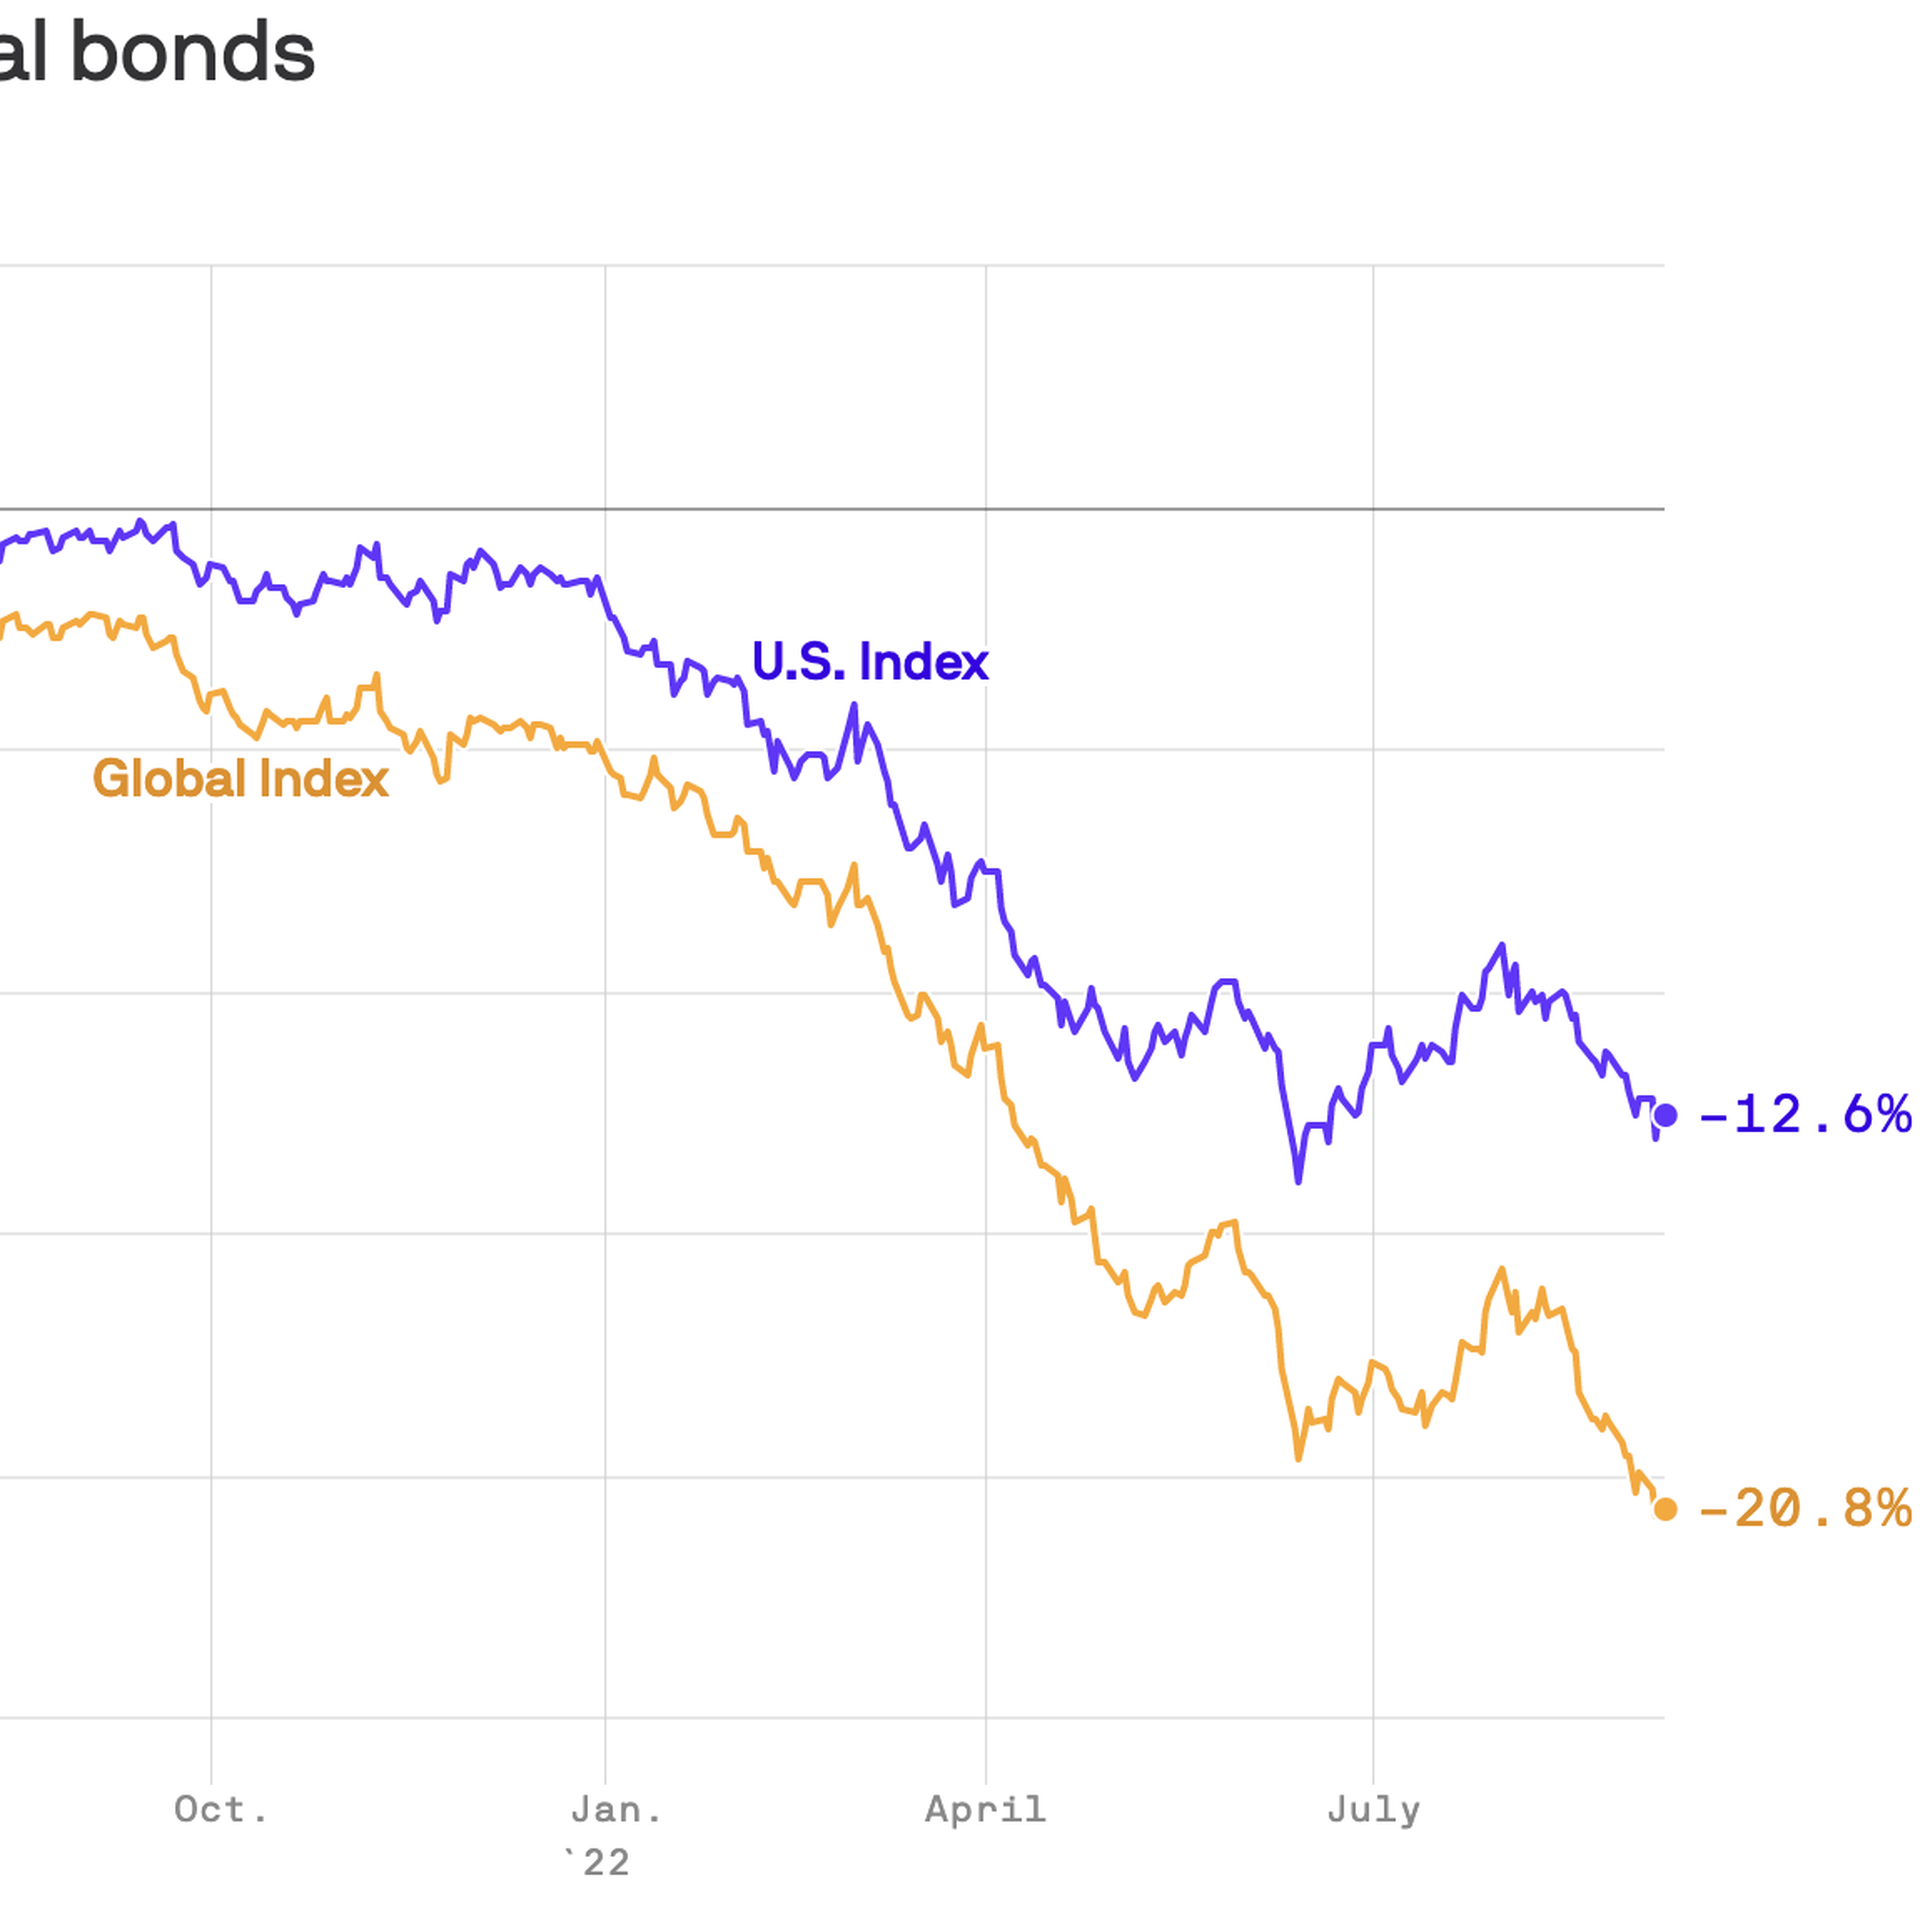 A chart showing total return of U.S. and global bonds from Jan. 2021-present.